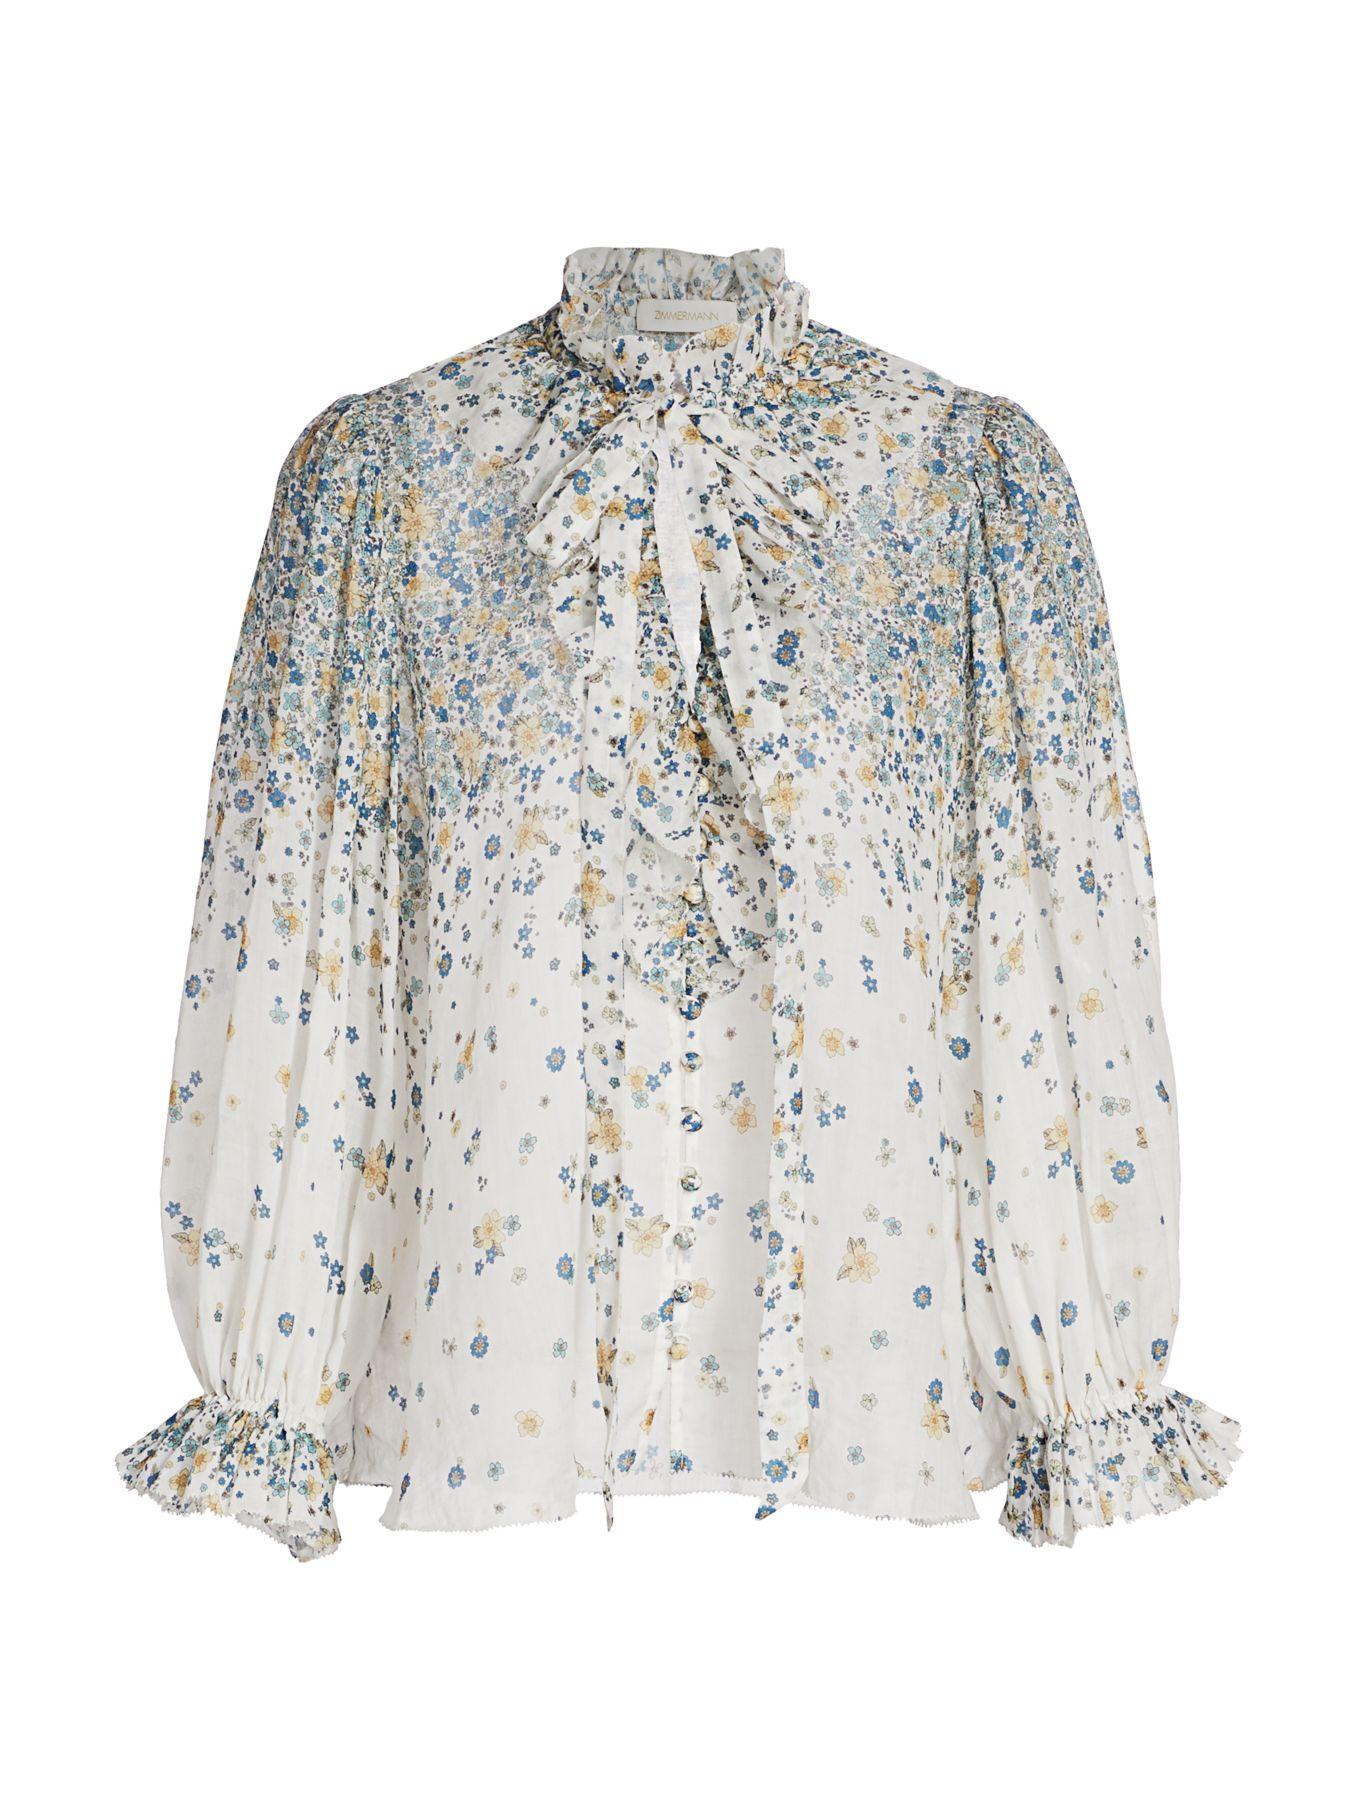 Zimmermann Carnaby Floral Tie Neck Blouse - Lyst